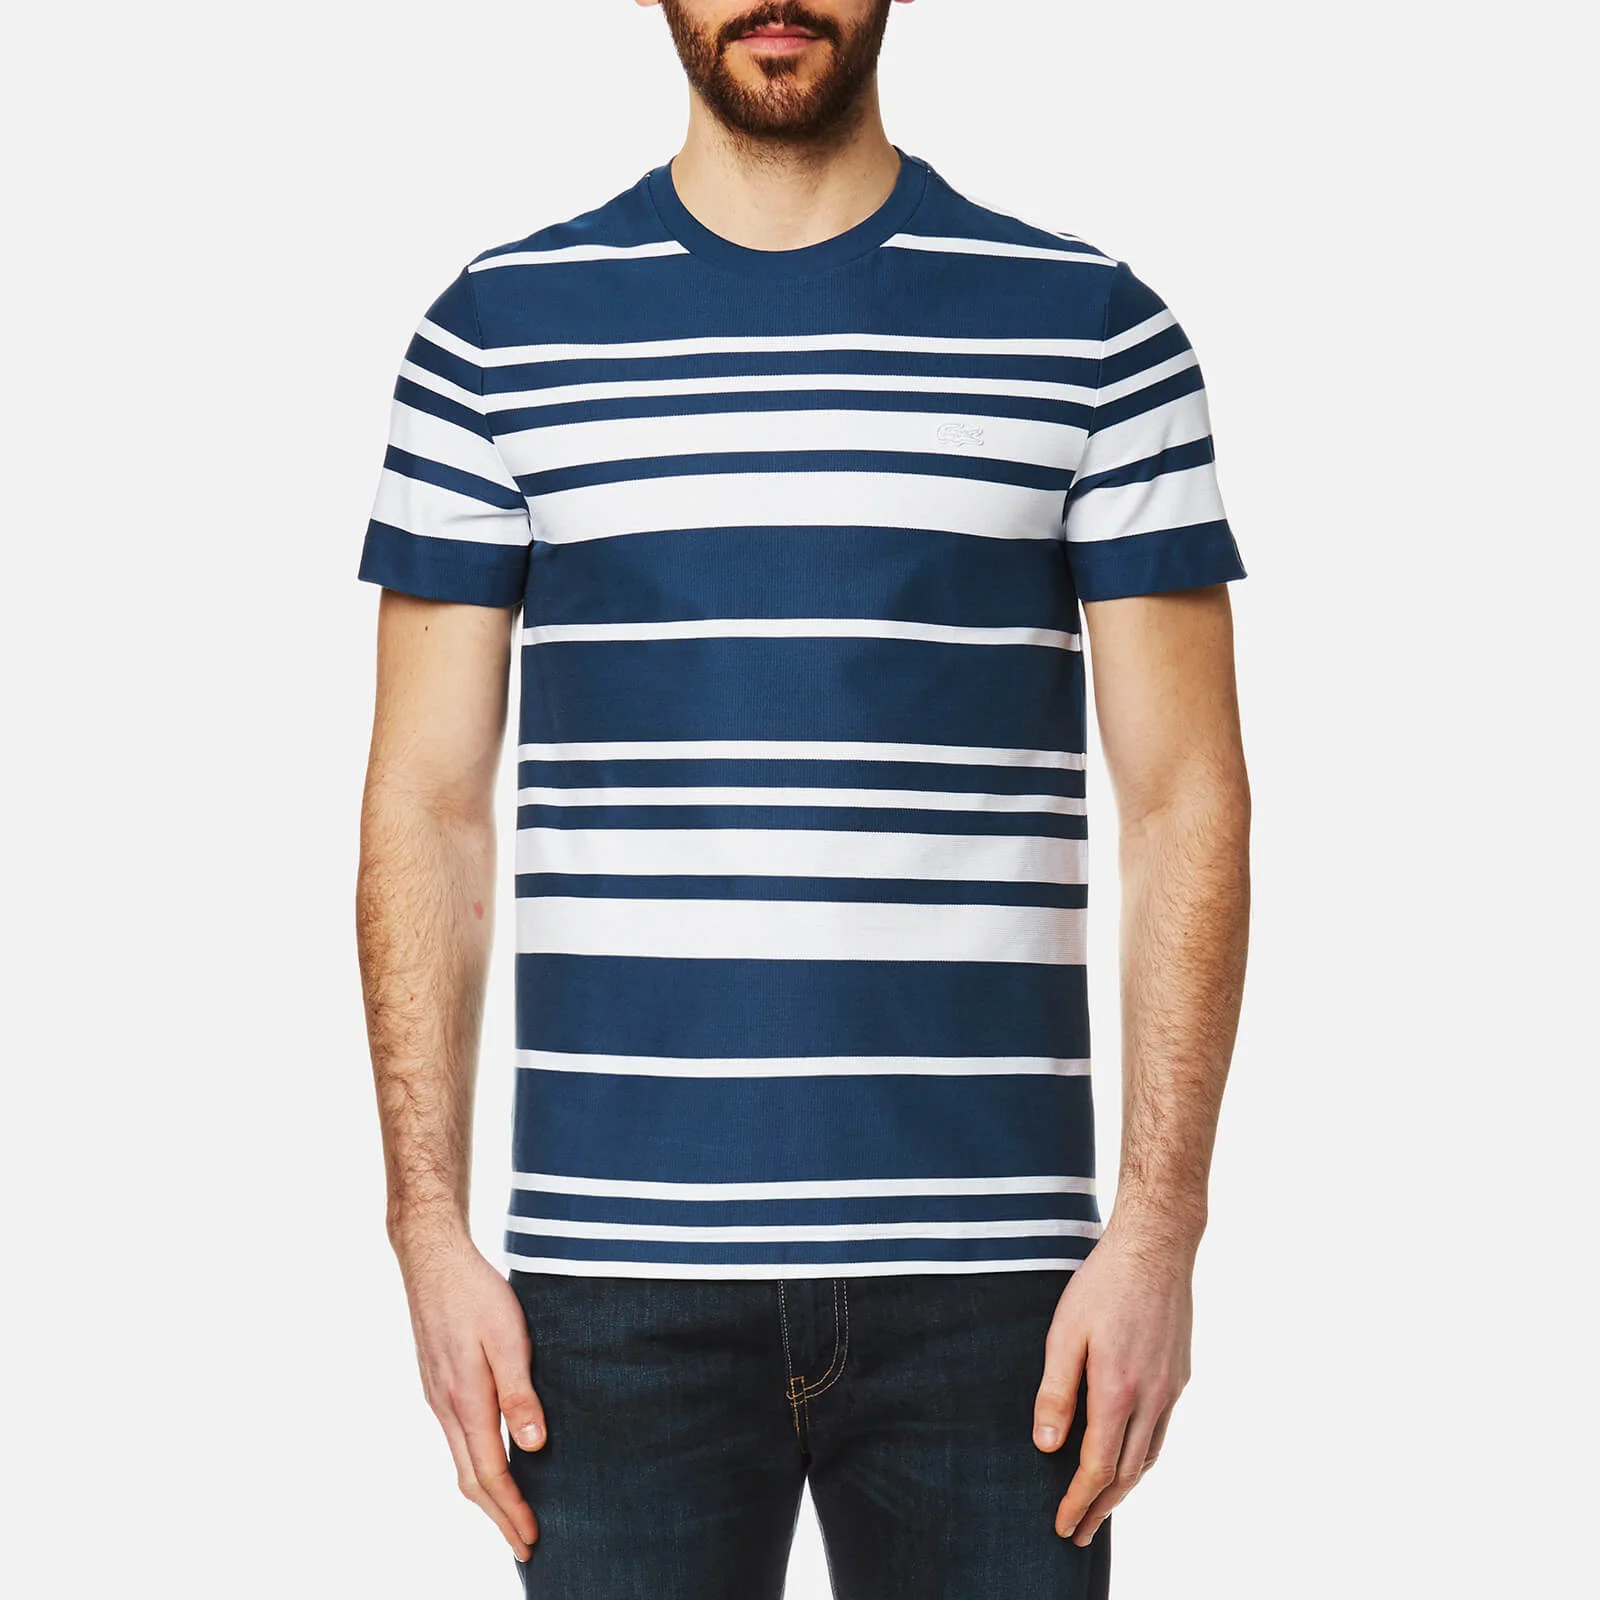 Lacoste Men's Striped T-Shirt - Inkwell/White Image 1